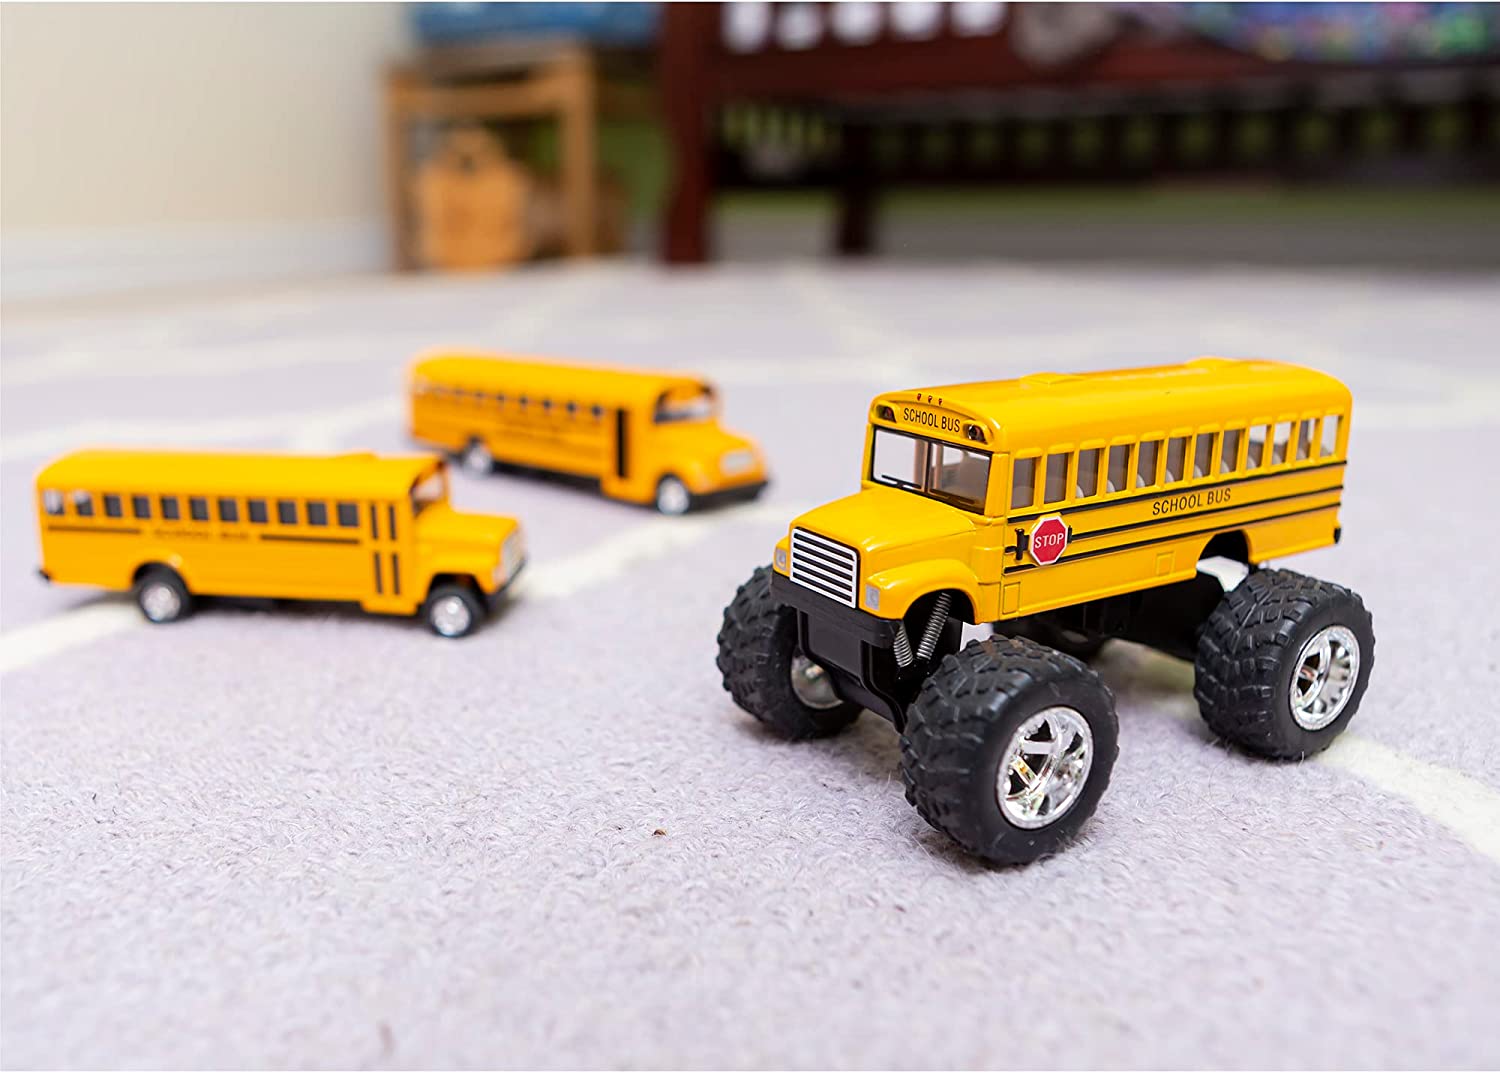 Toysmith 5020 Monster Bus, 5-Inch - image 5 of 7